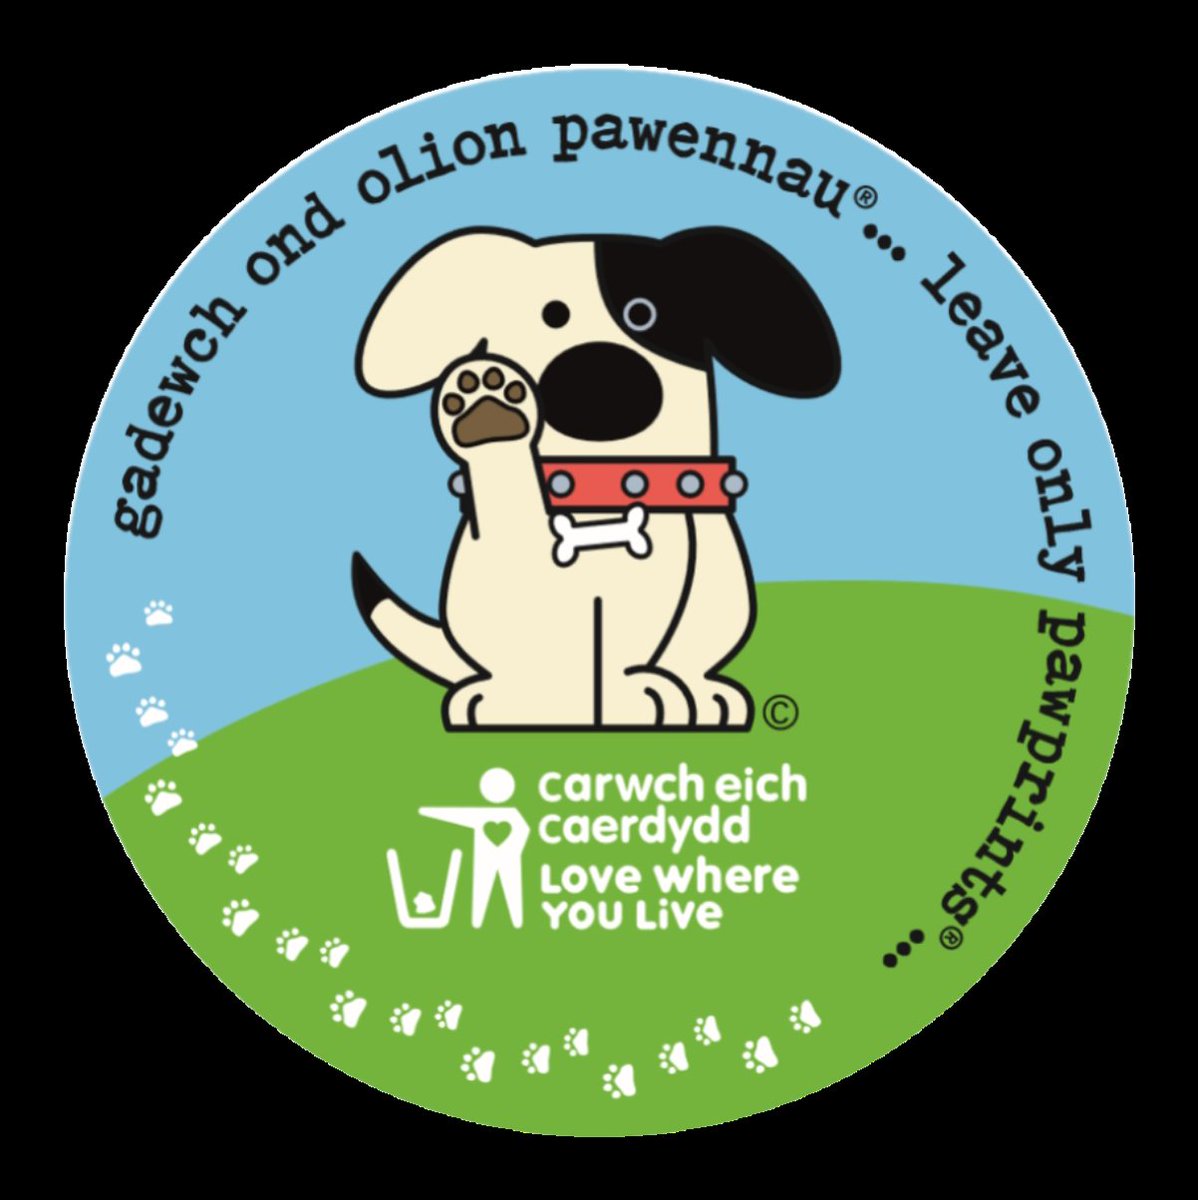 If you’re a dog owner, you have a legal duty to clean up every time your dog fouls in a public place. One of the Urban Park Ranger’s roles is to educate dog owners. Keep our parks clean and safe.
#CardiffParks #Cardiffcouncil #loveyourcity